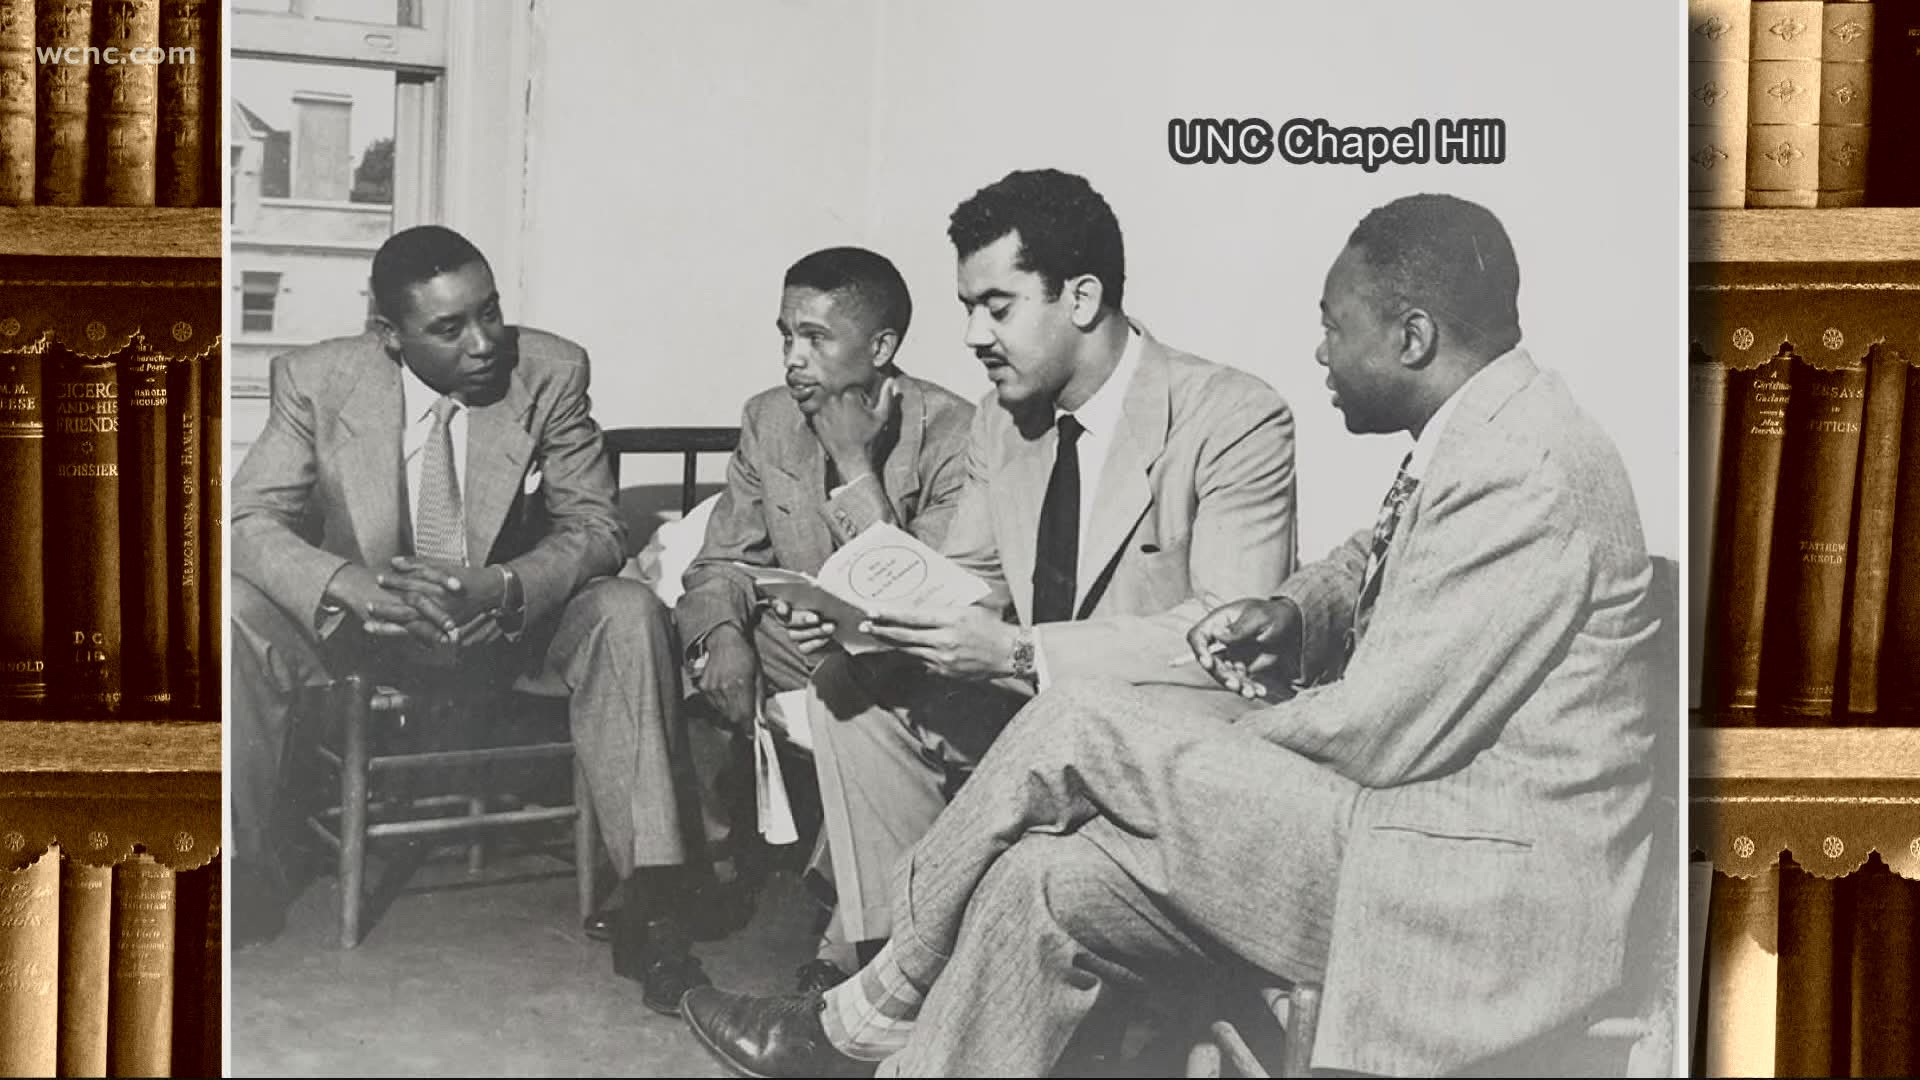 In 1951, five Black men enrolled in the UNC-Chapel Hill School of Law after a court order said the school must accept Black students.